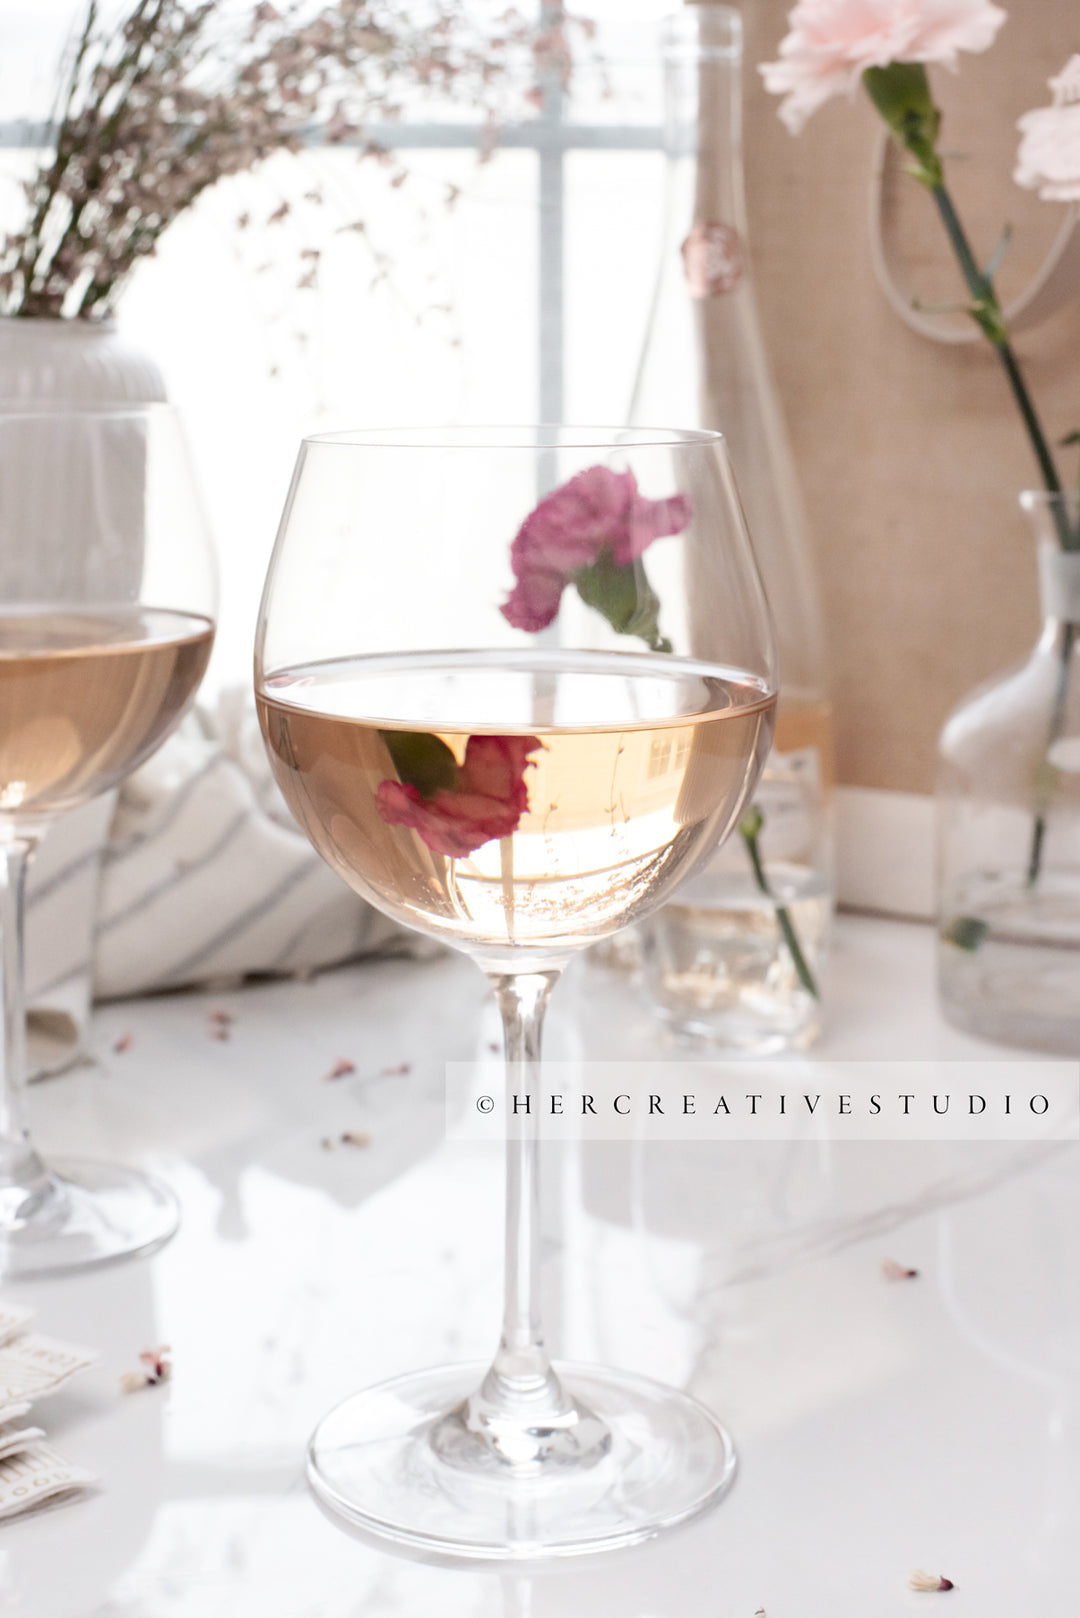 Glass of Wine on Table, Styled Image